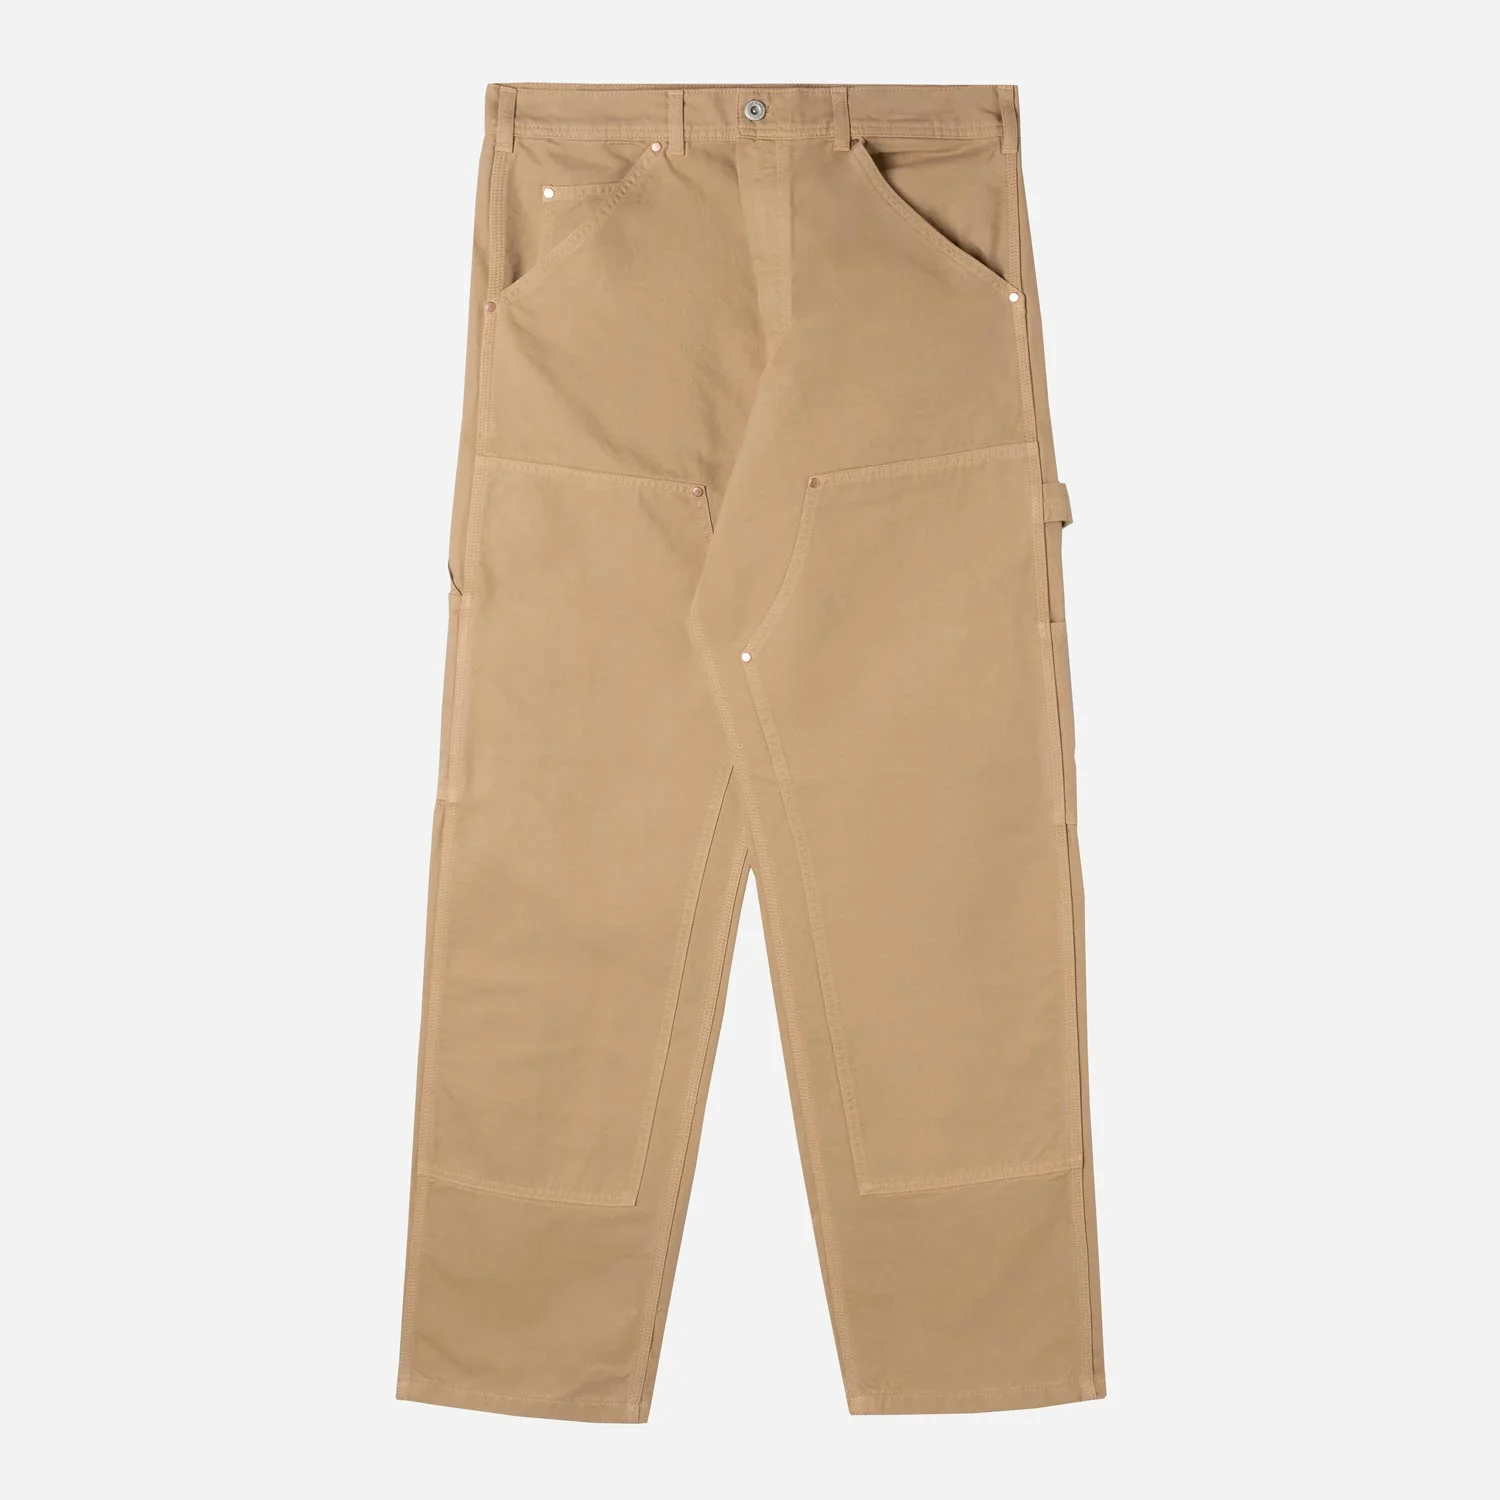 Stanray Relaxed Straight Fit Double Knee Pant - Khaki Twill